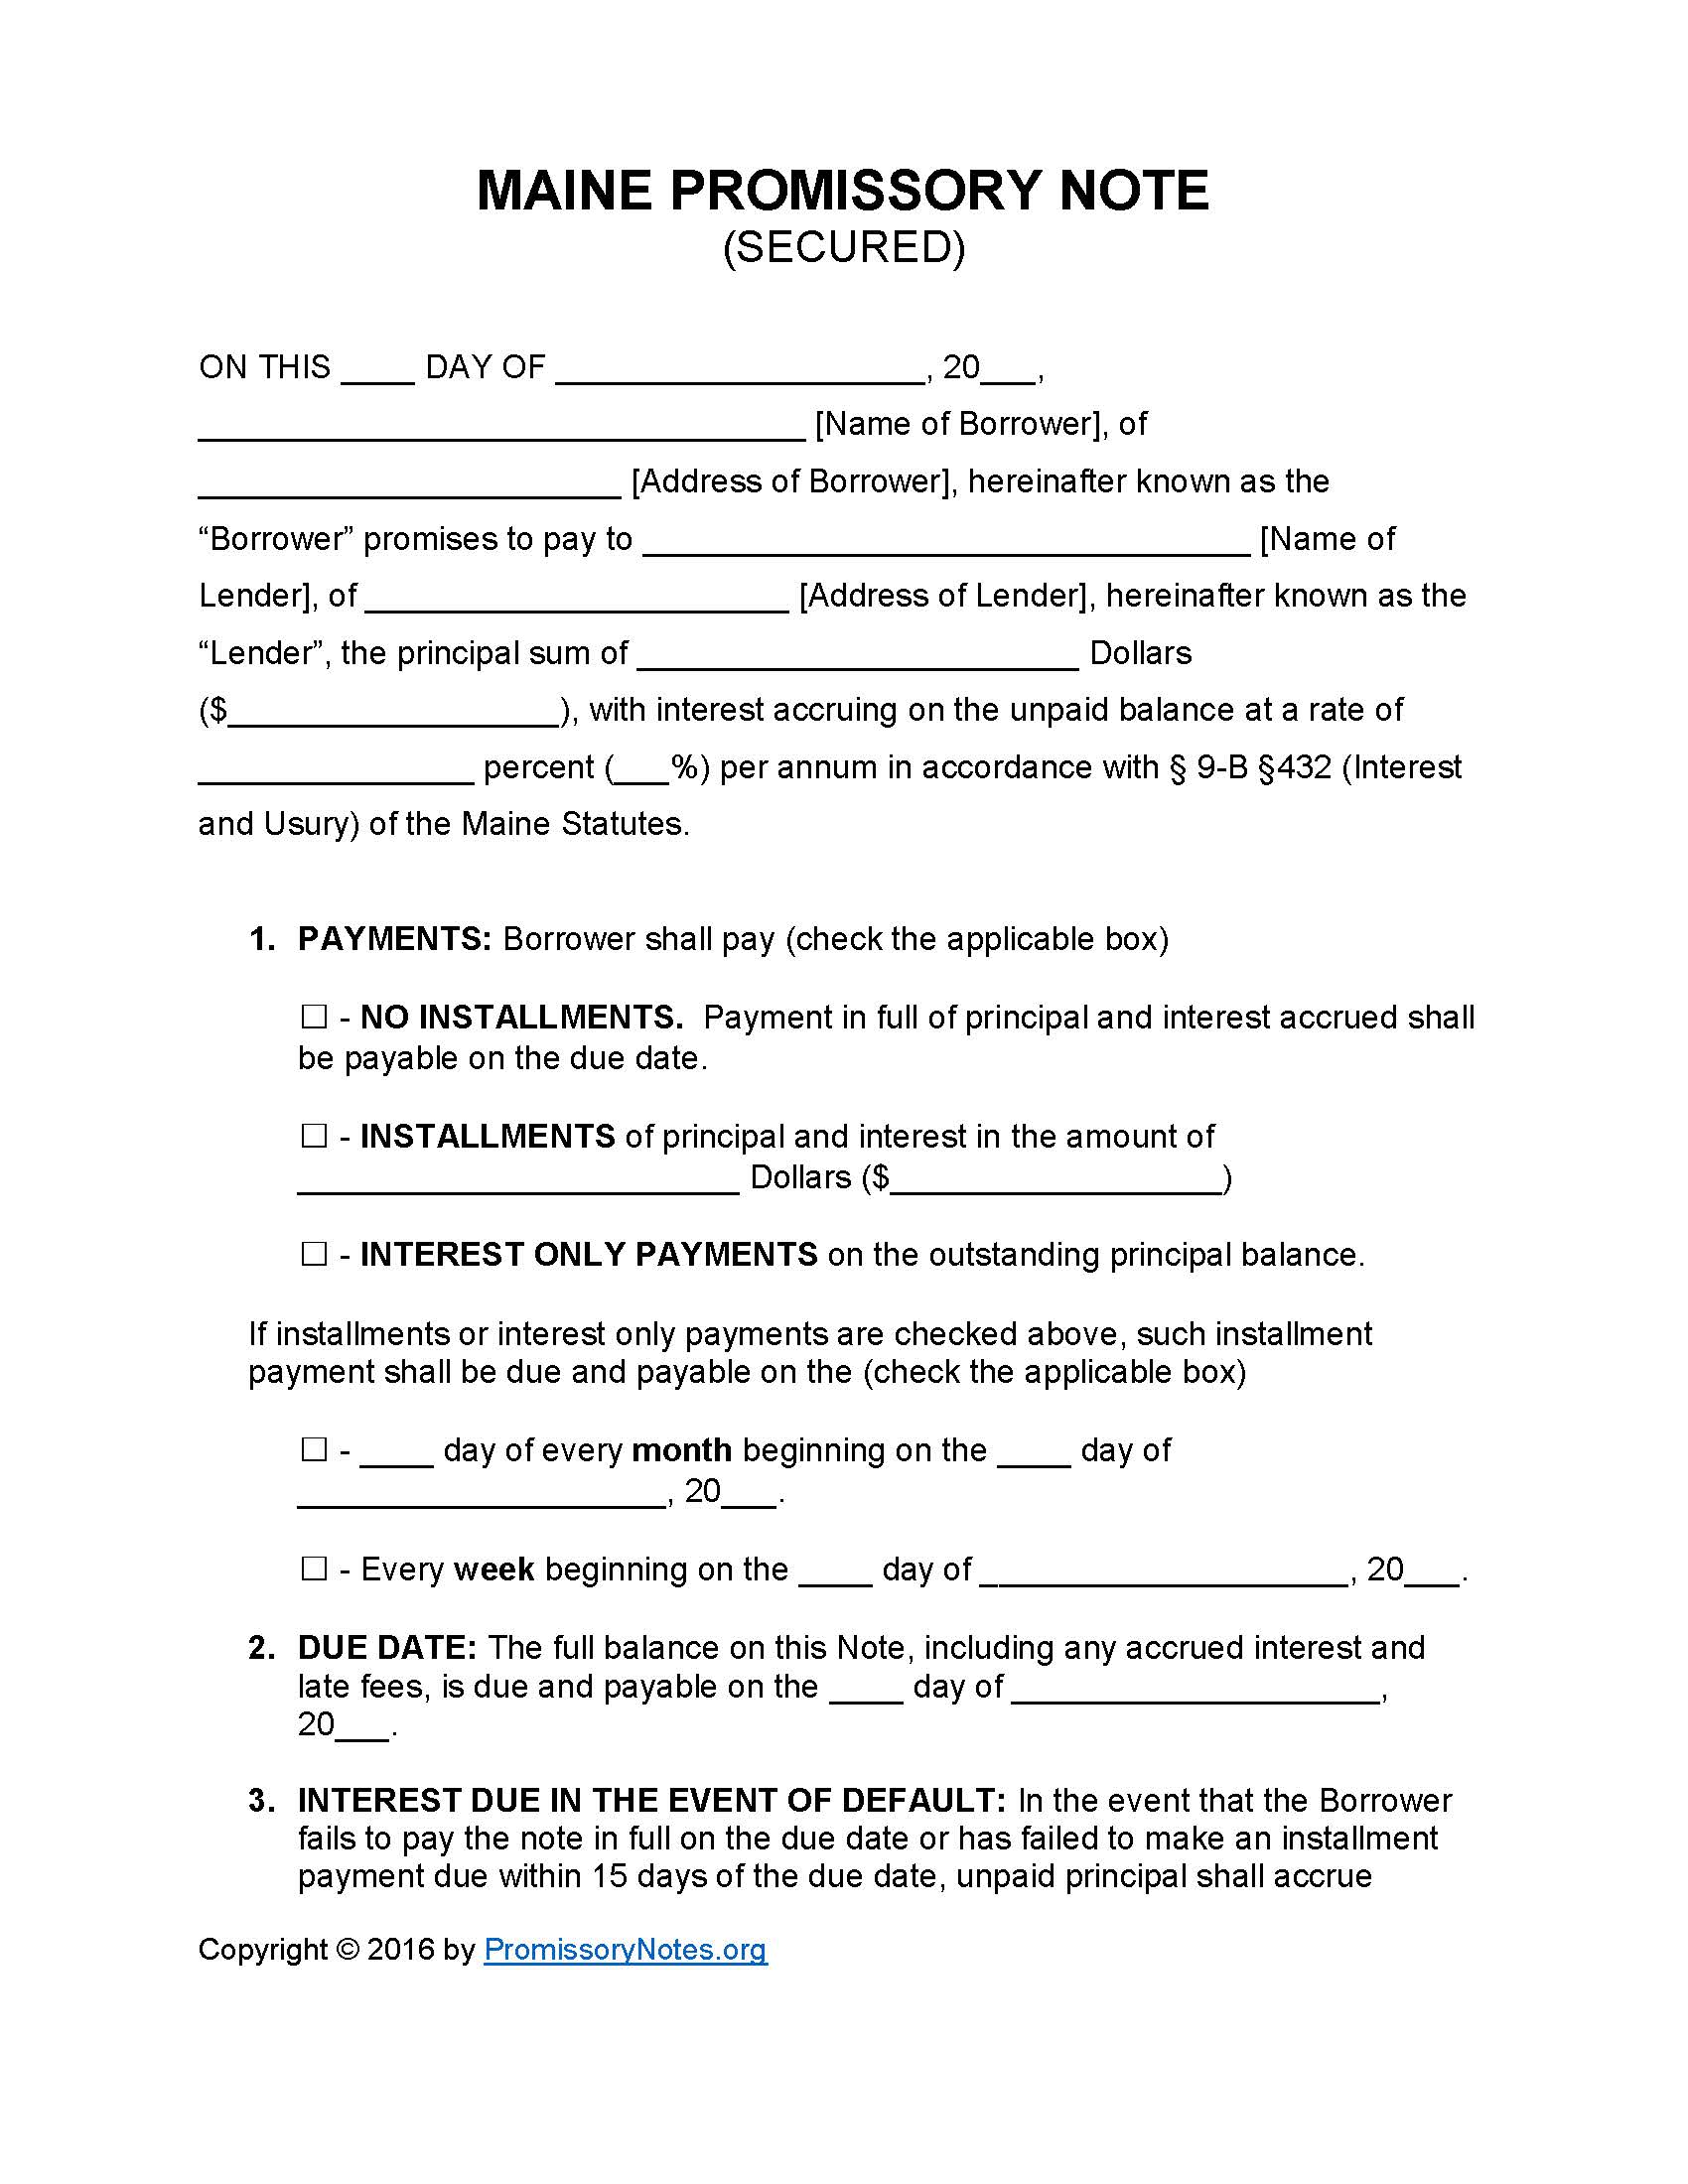 maine-secured-promissory-note-form